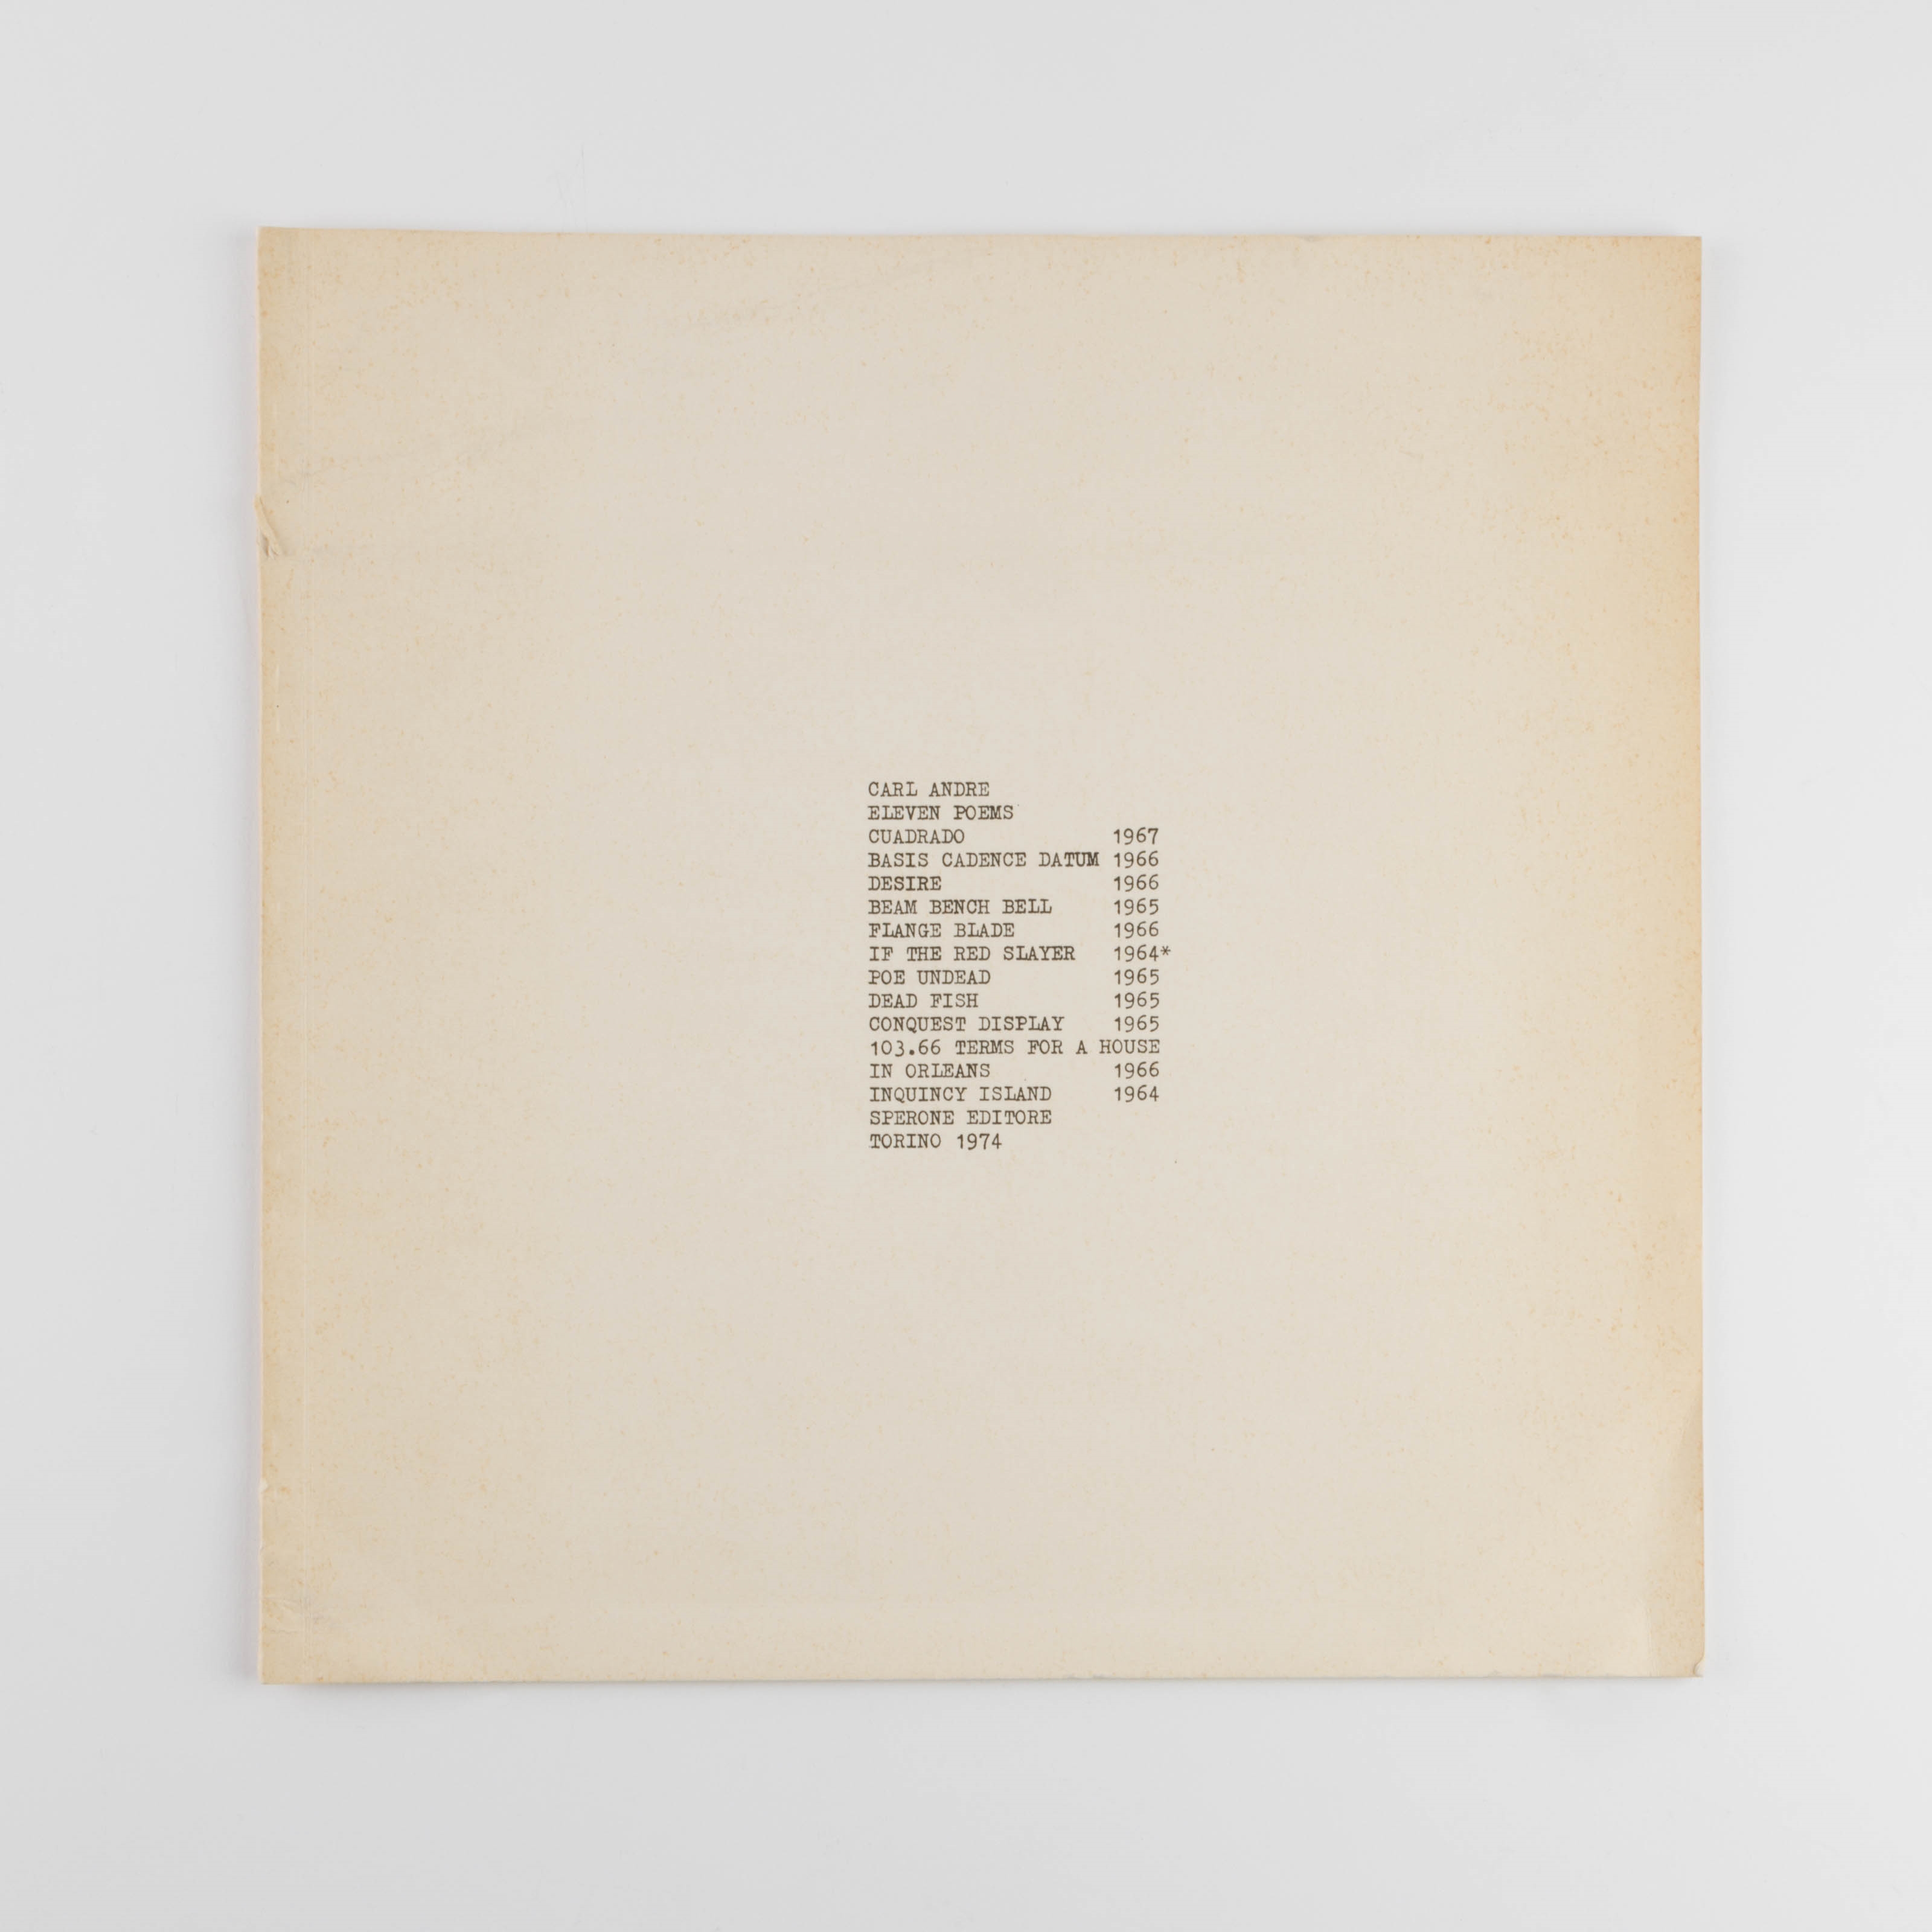 11 Poems - Carl Andre